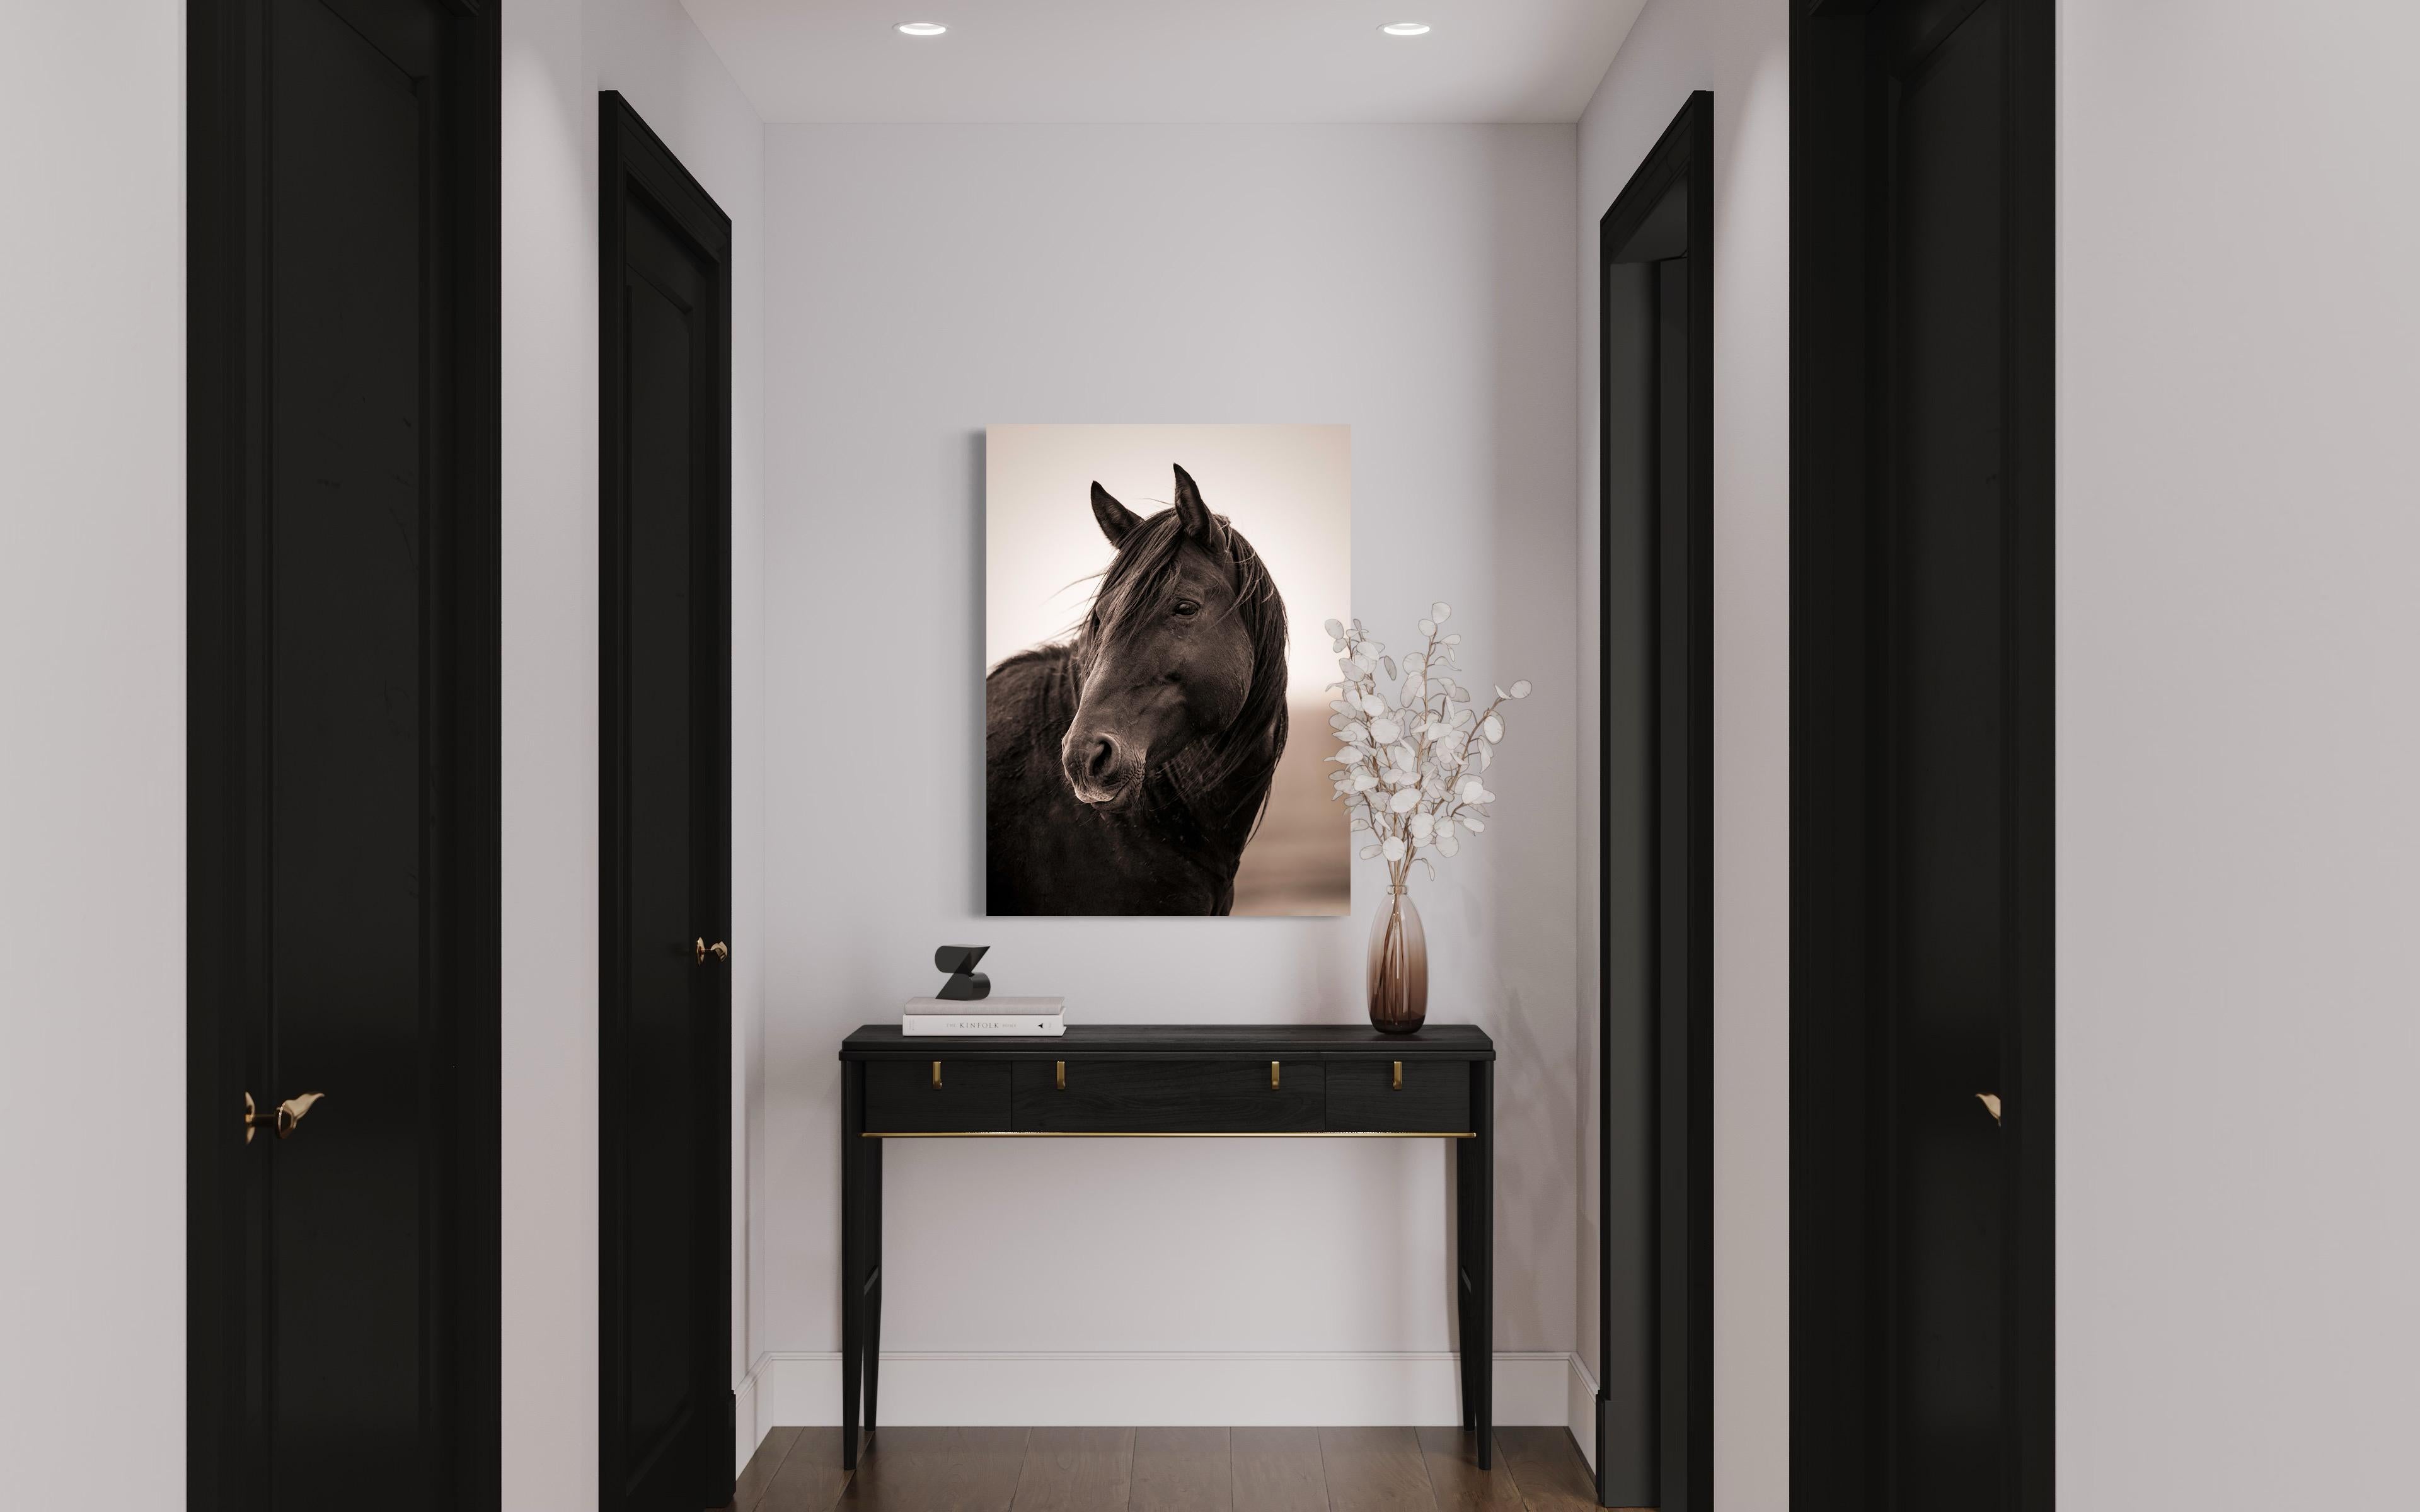 This black and white contemporary photograph by Tori Gagne captures a close-up view of a wild horse. An edition size of 25, this photograph is available as a metal sublimation print with a 1.3” deep silver flush mount frame and white gloss or satin